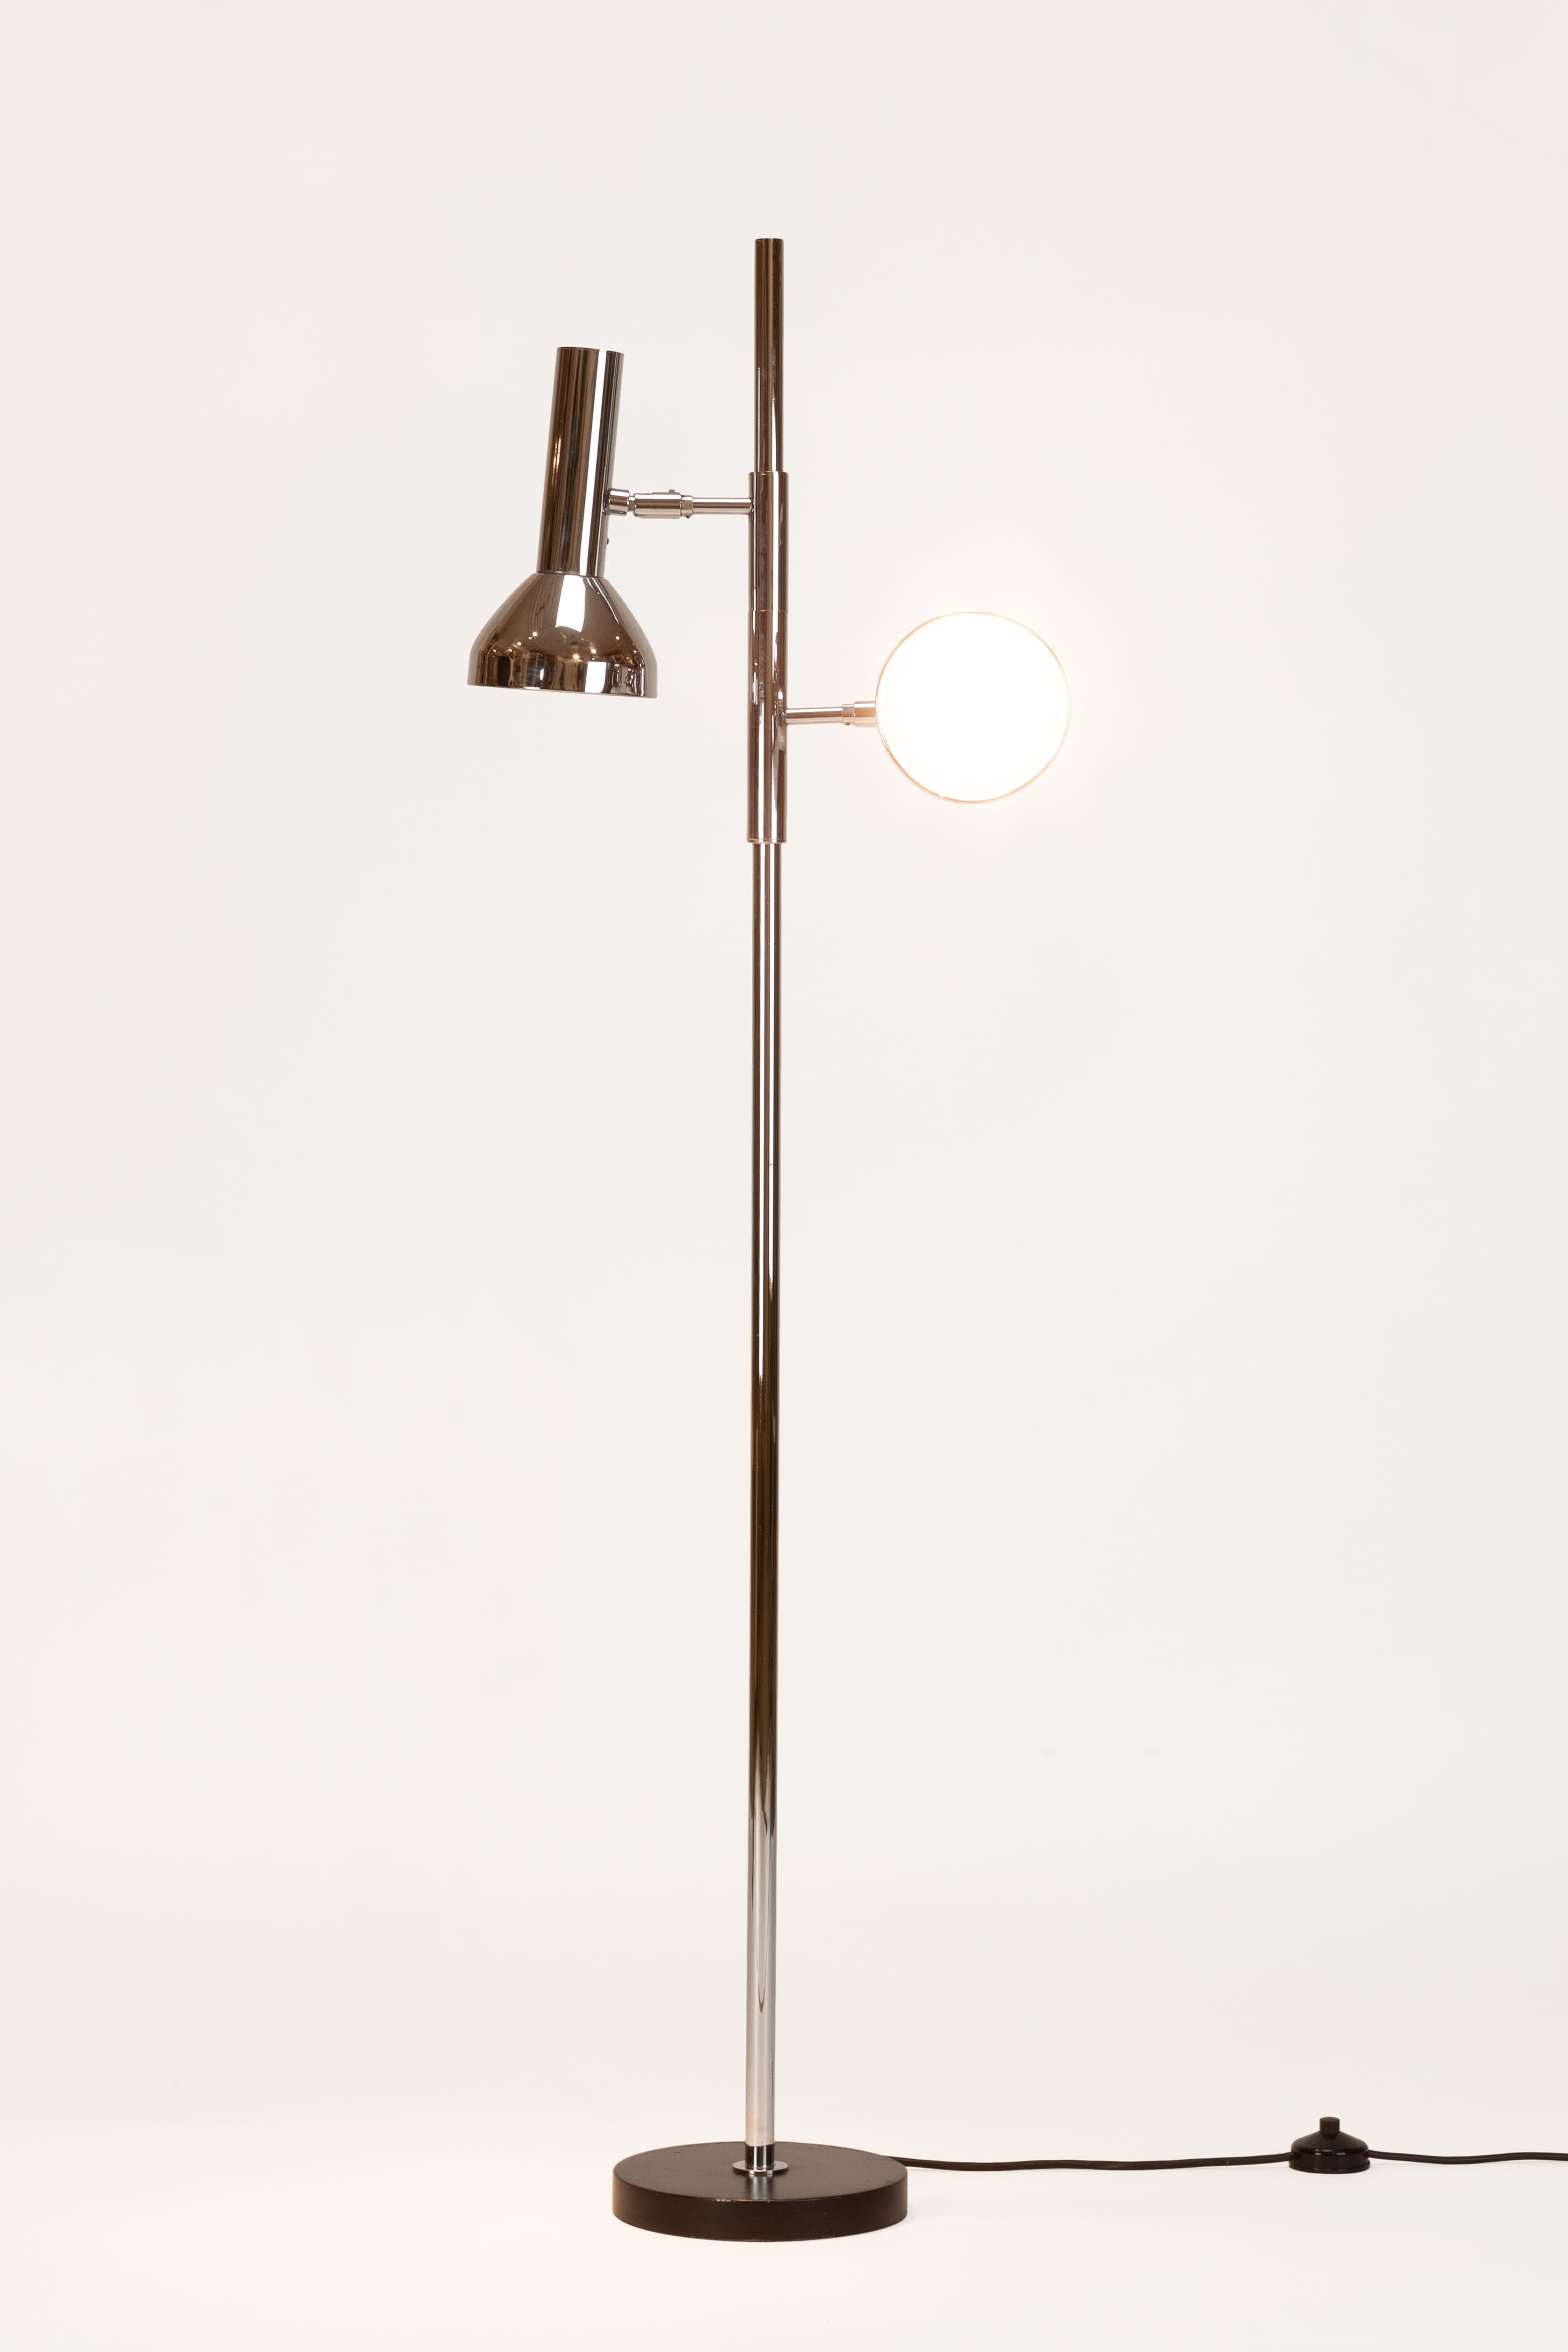 Spot floor lamp manufactured by Staff in the 1960s in Germany. Two adjustable spots attached with a cylindrical body to the pole.